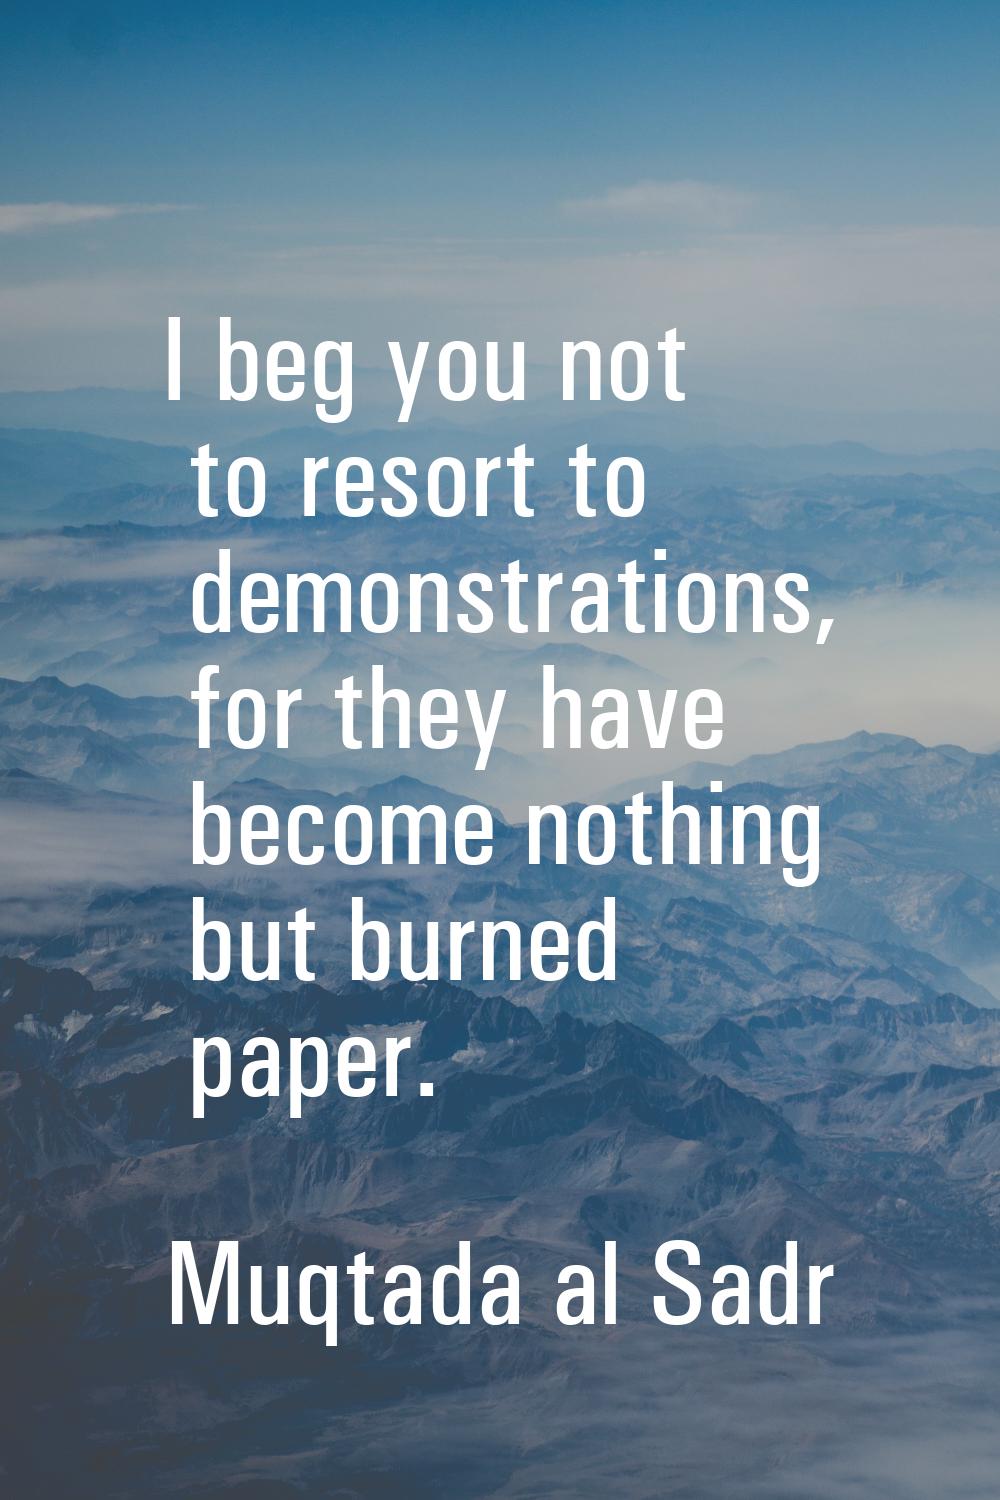 I beg you not to resort to demonstrations, for they have become nothing but burned paper.